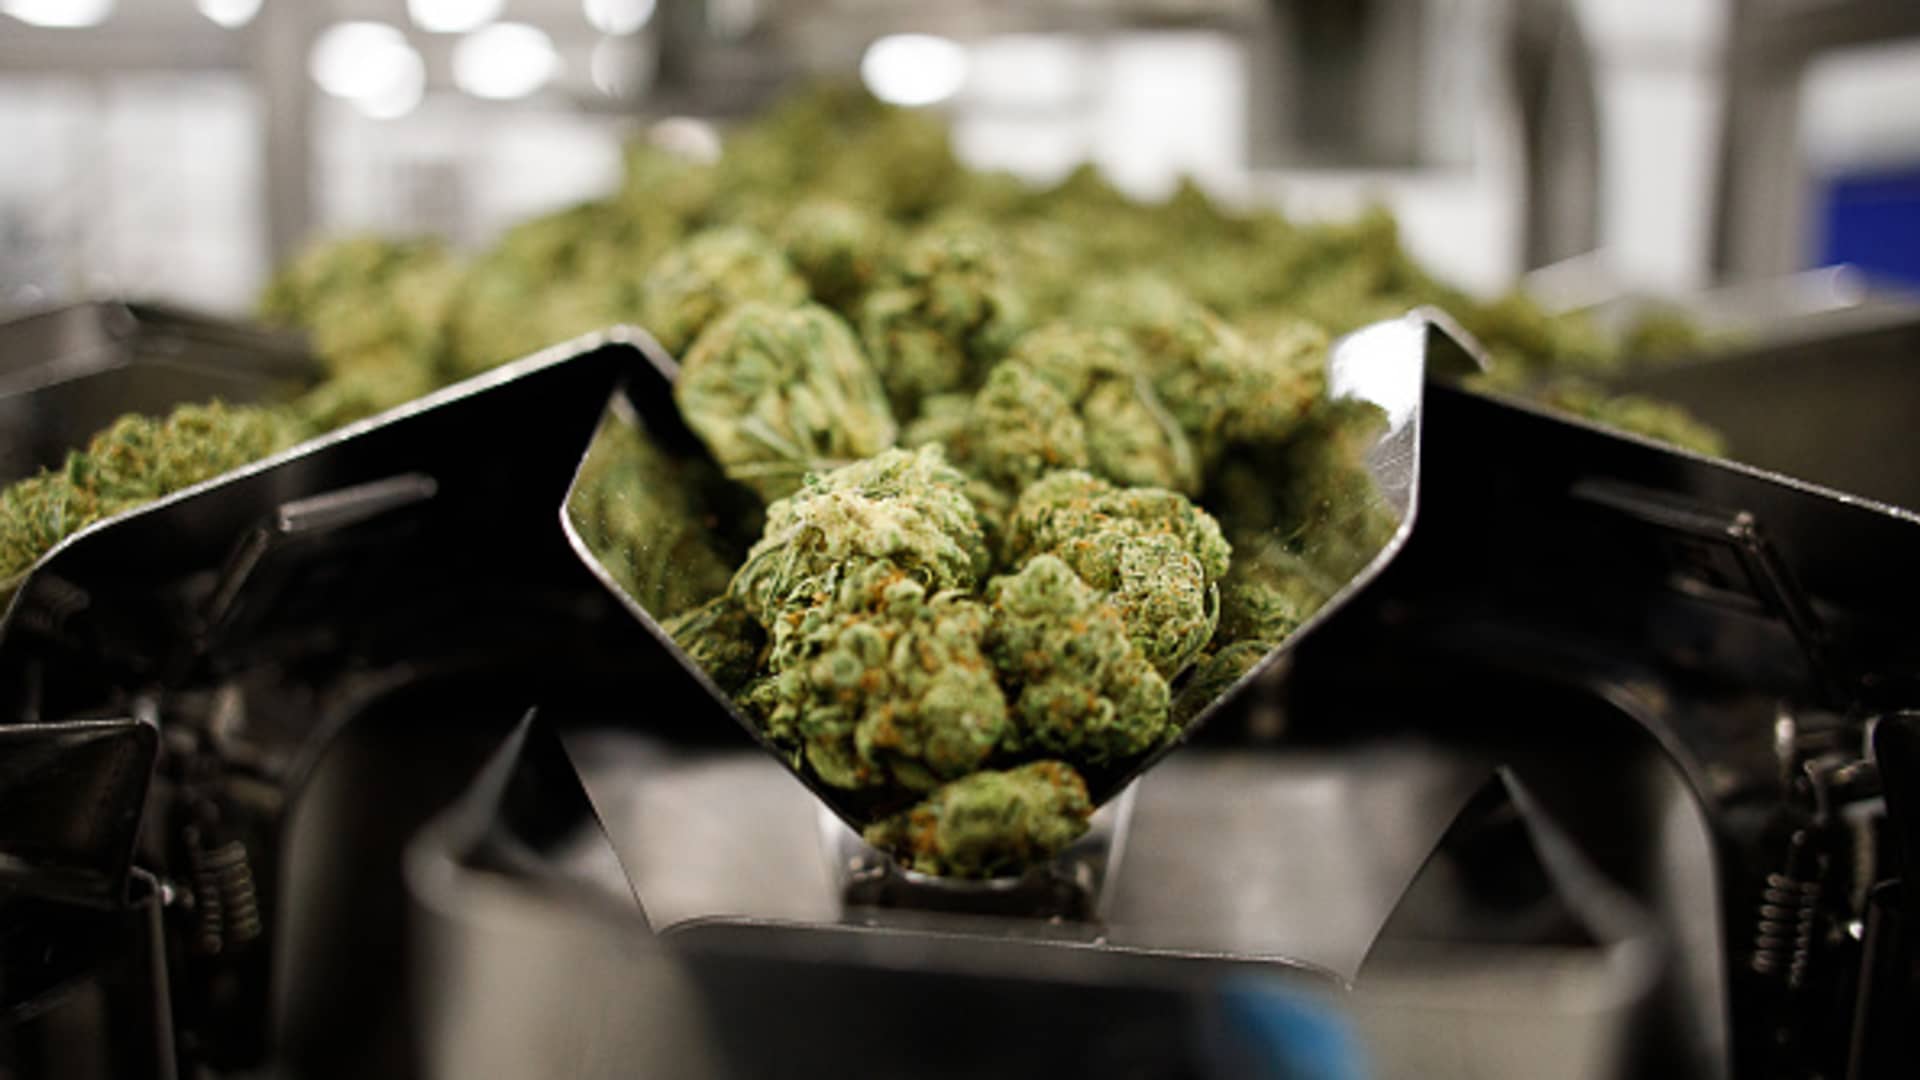 Dry cannabis flowers inside the packaging room at the Aphria Inc. Diamond facility in Leamington, Ontario, Canada, on Wednesday, Jan. 13, 2021.